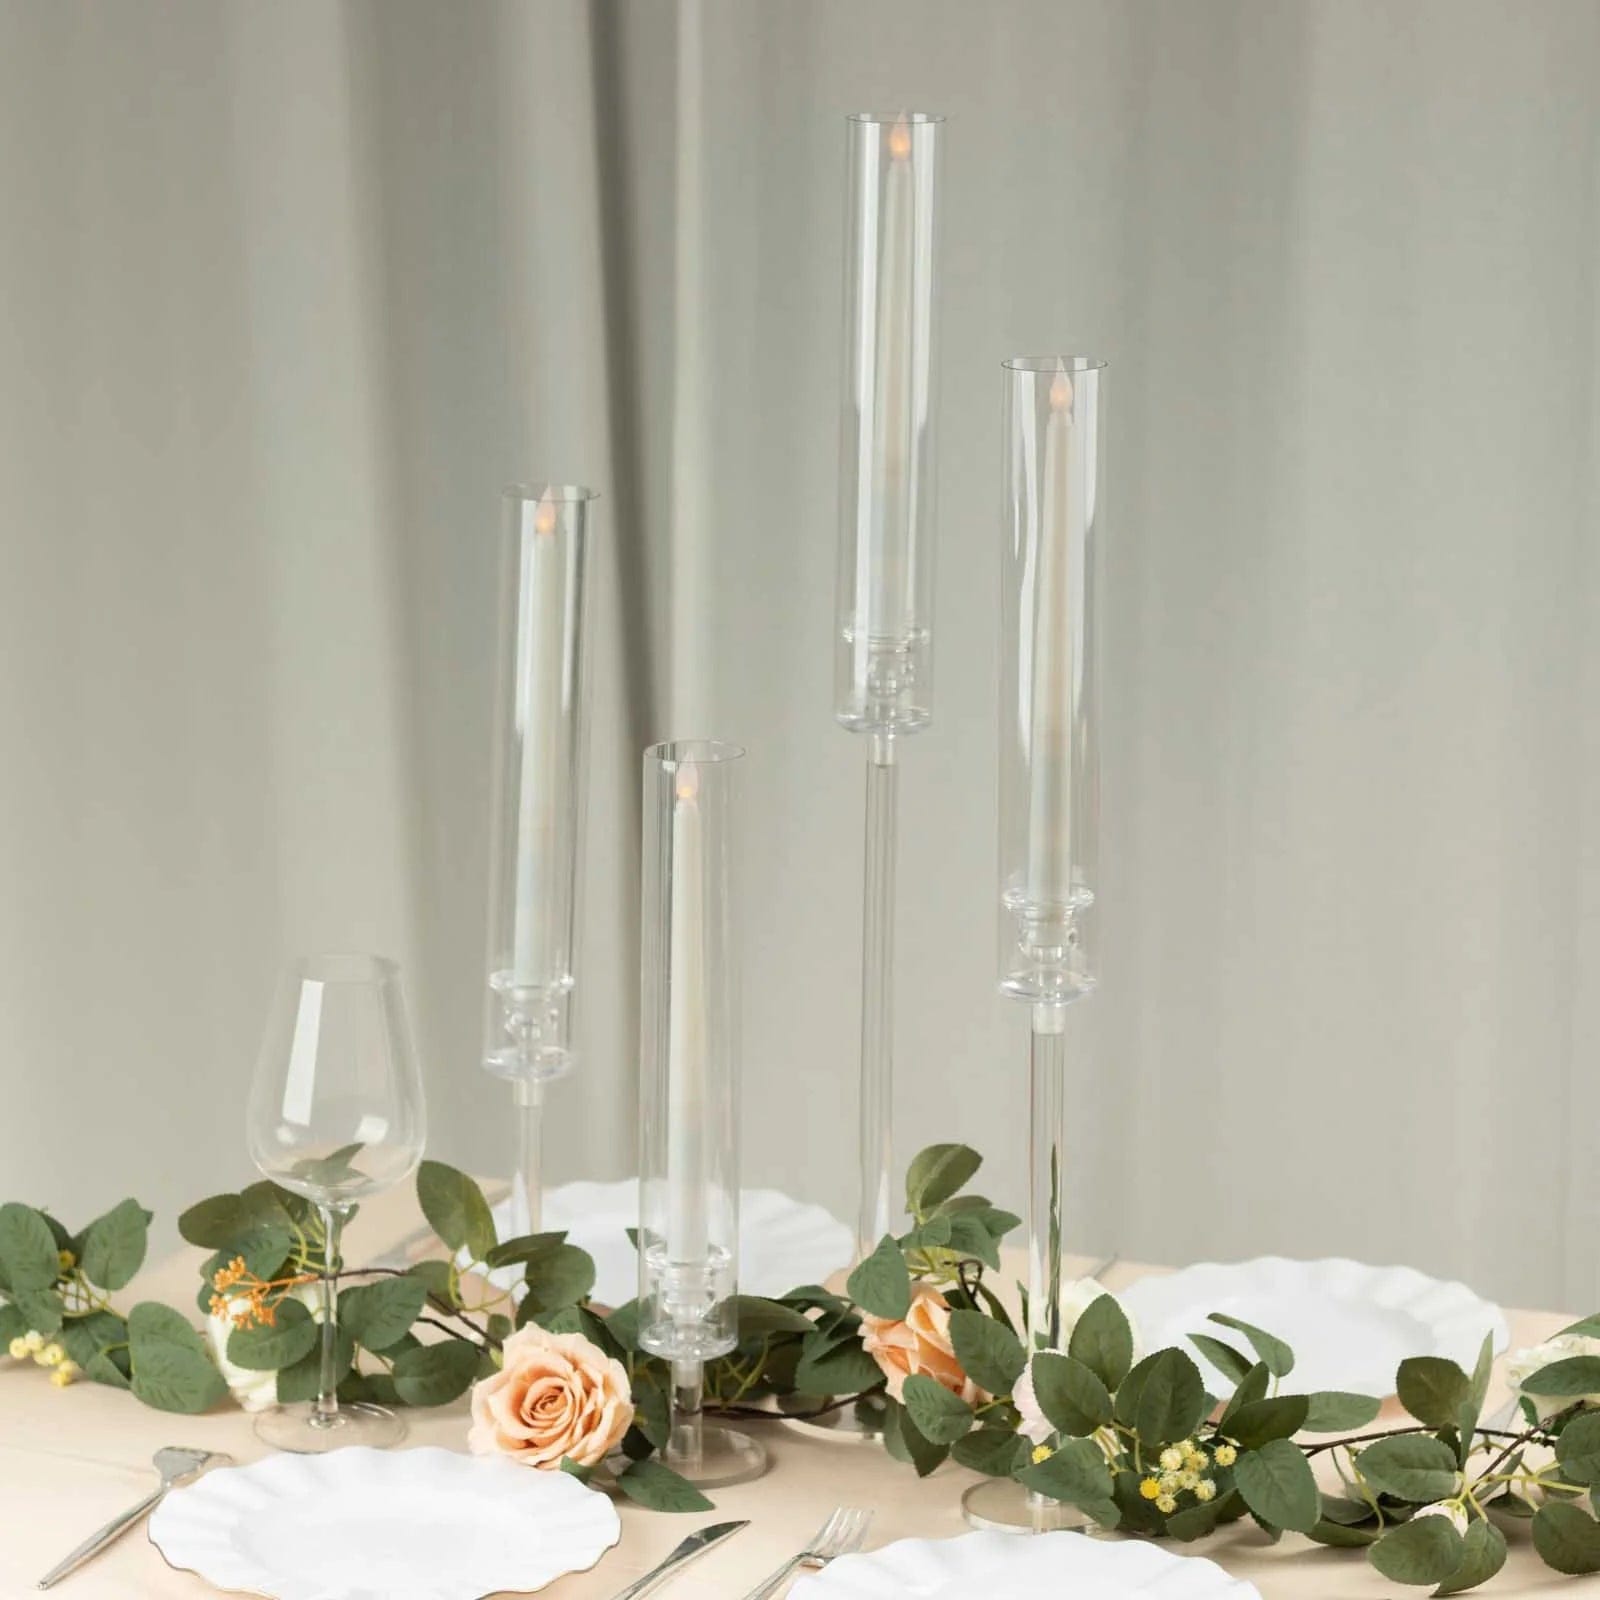 4 Clear Acrylic Hurricane Taper Candle Holders with Cylinder Shades